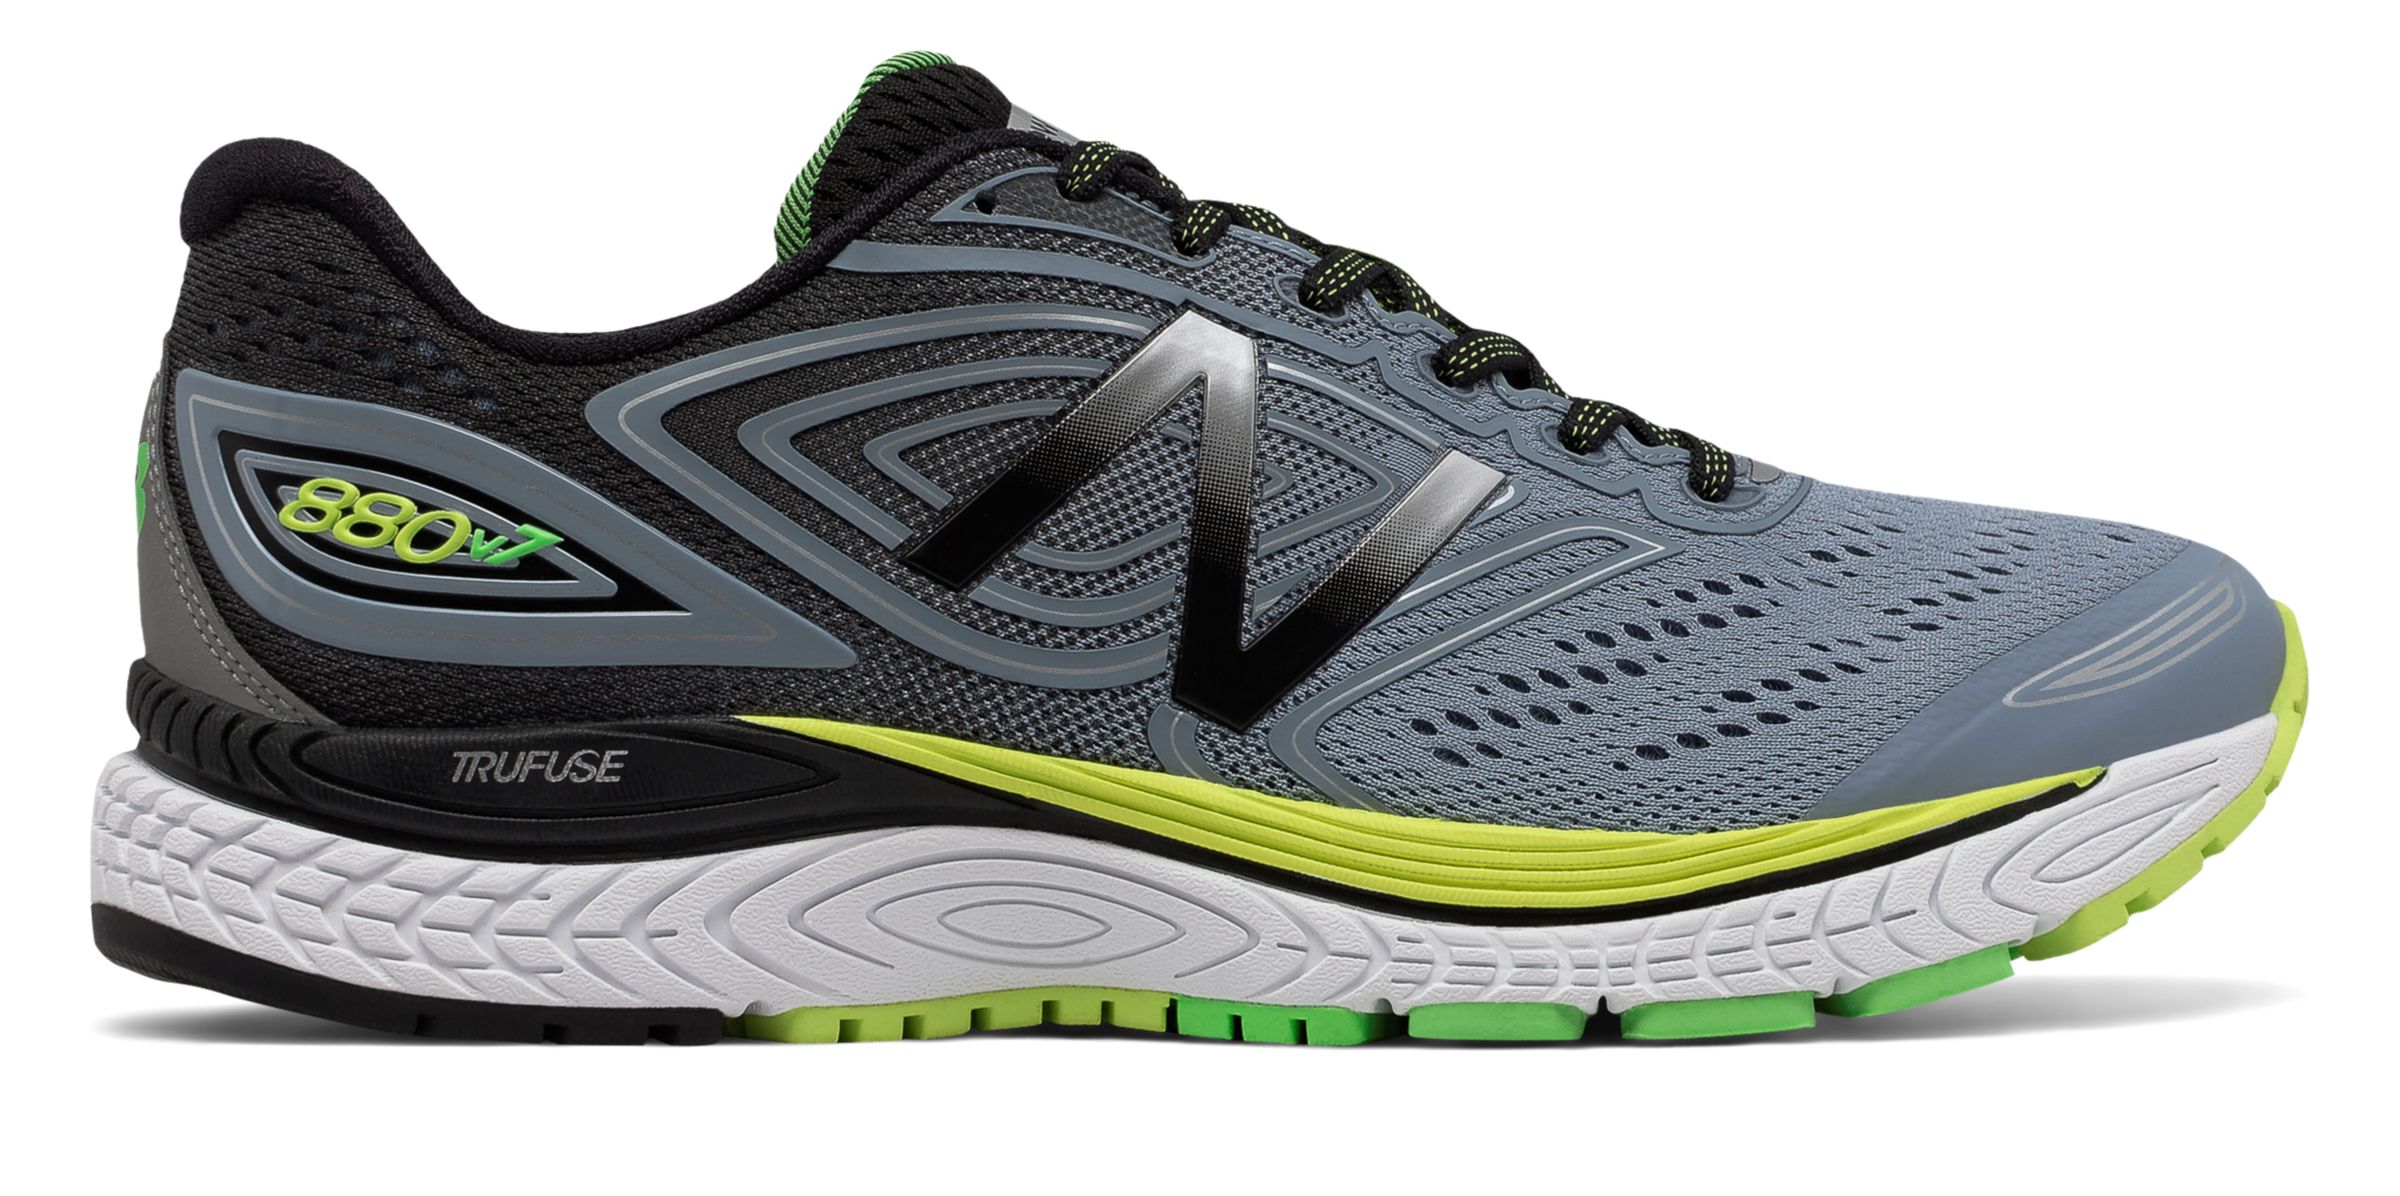 New Balance M880-V7 on Sale - Discounts Up to 40% Off on M880GY7 at Joe's New  Balance Outlet